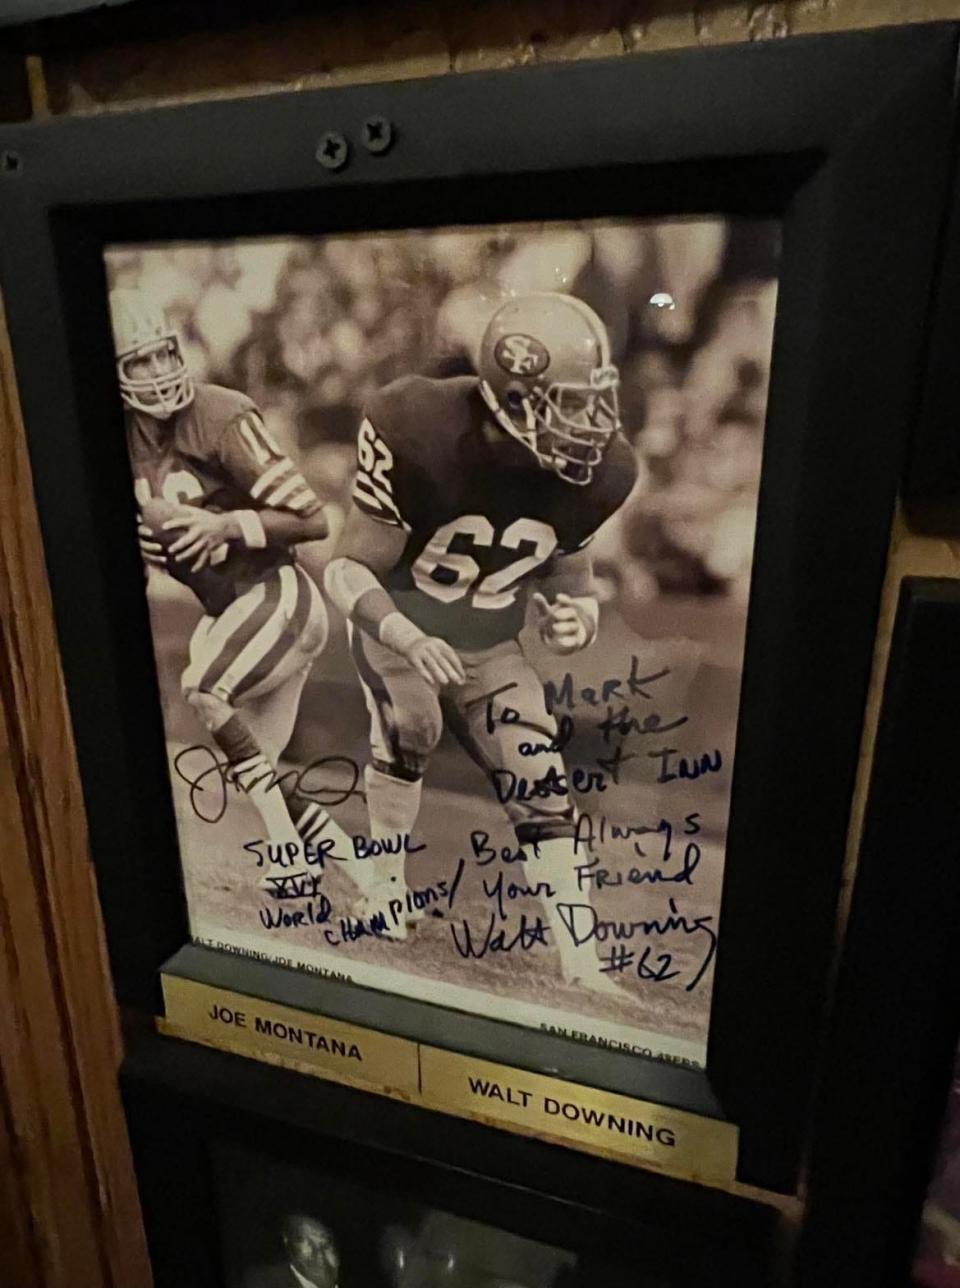 Autographed photos of sports stars like former San Francisco 49ers quarterback Joe Montana adorn the walls in the lobby of the Desert Inn restaurant in Canton.